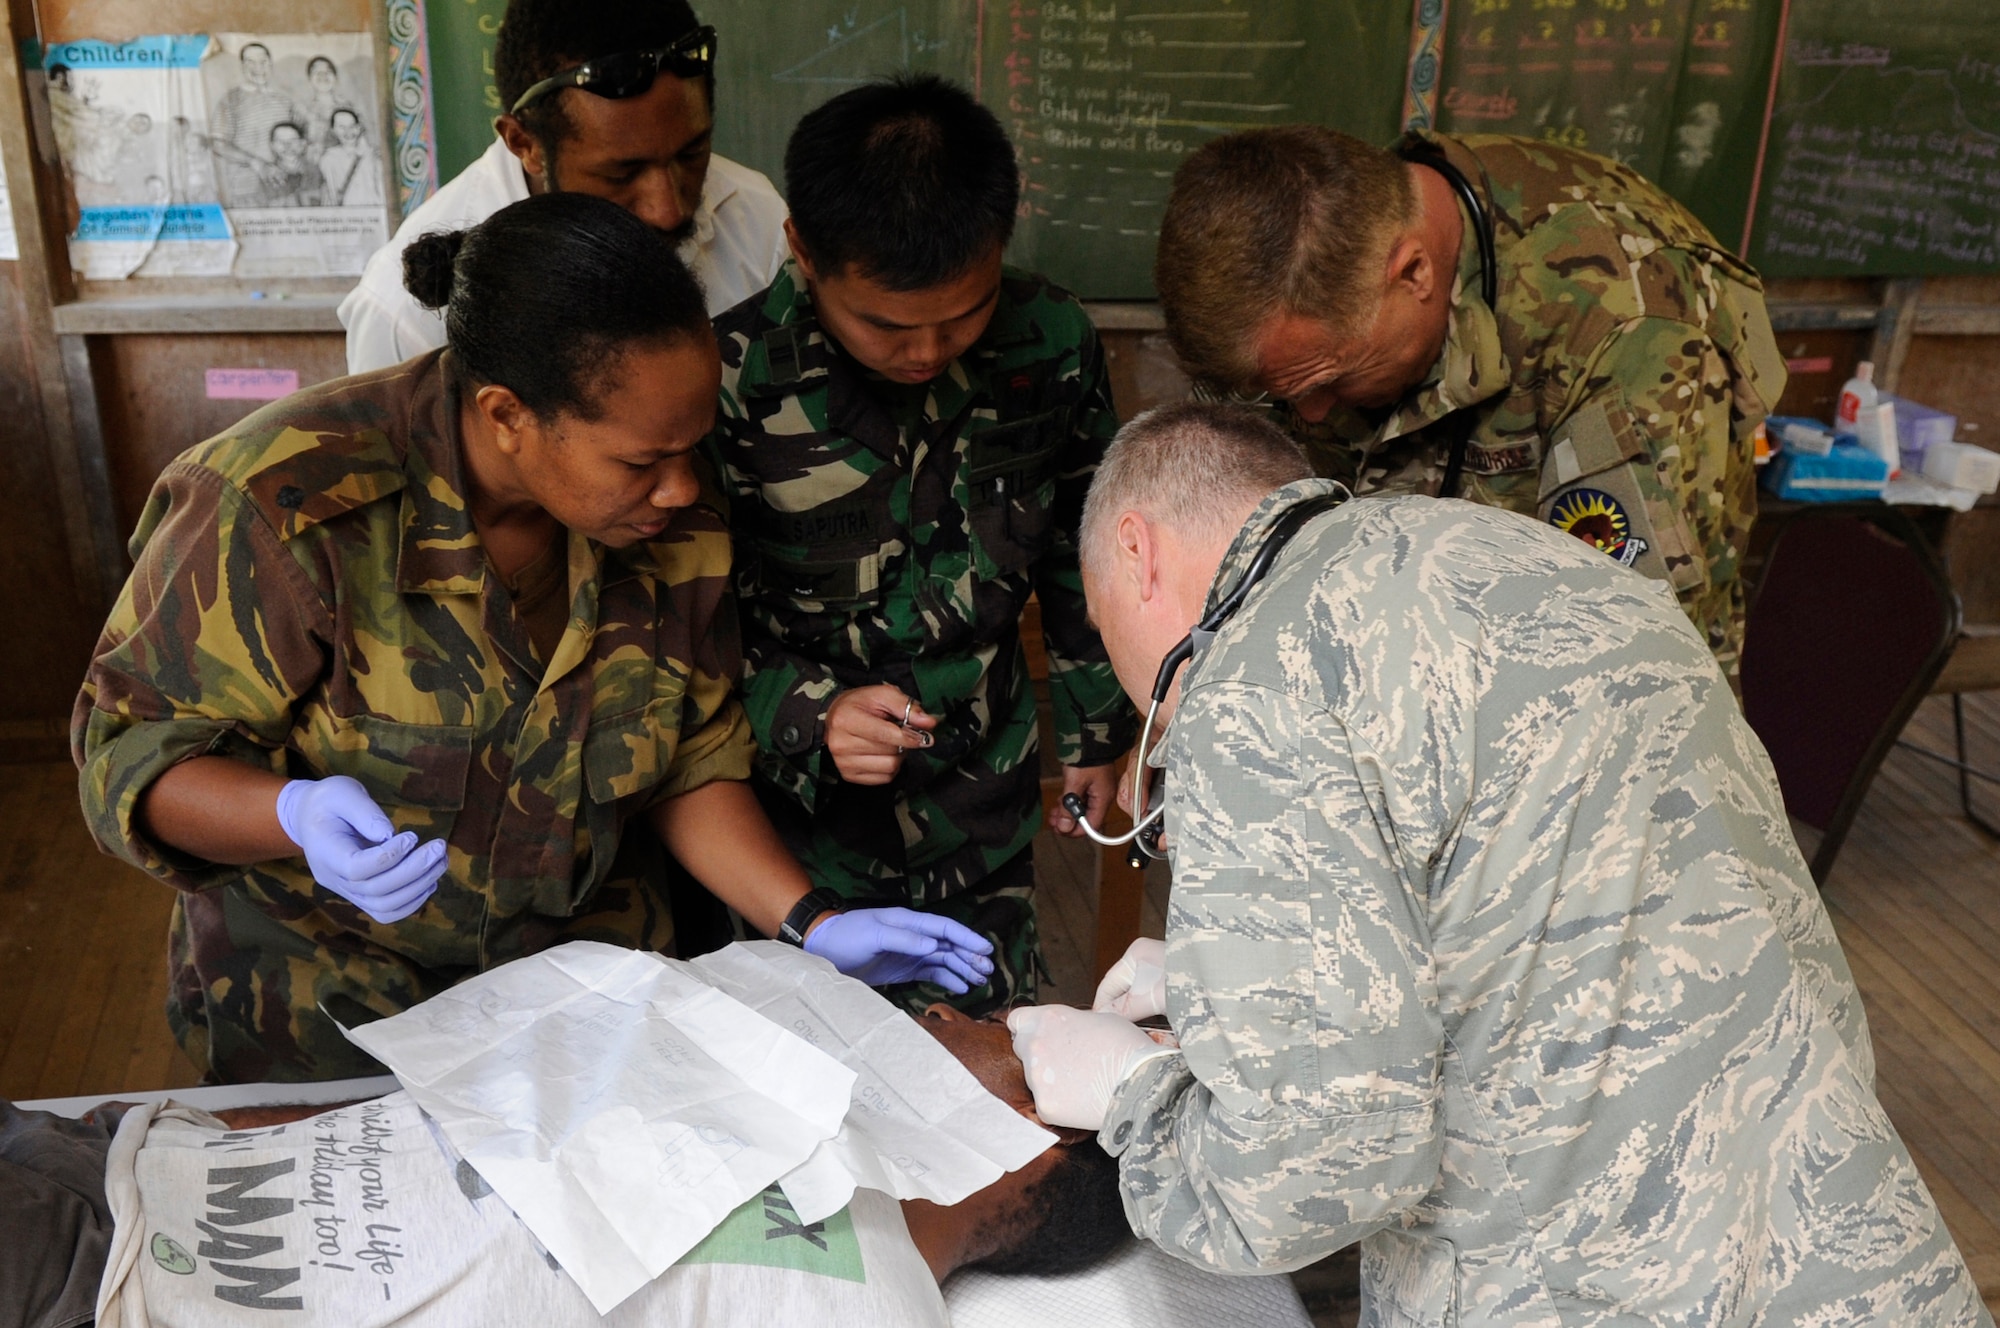 U.S. Air Force Lt. Col. Jeffrey Freeland, bottom right, Pacific Air Force chief of aerospace medicine from Joint Base Pearl Harbor-Hickam, Hawaii, removes a fatty tumor from a local man???s head while medical professionals from Papua New Guinea, Indonesia and the U.S. Air National Guard assist during Pacific Angel 15-4 at Unggai Primary School in Papua New Guinea, June 1, 2015. The medical team treated 514 patients by the end of their first day and reached a total of 2,000 patients treated in their three-day stay at their first health services outreach location. The mission of Pacific Angel is to upgrade education and health facilities in the area, as well as work to deepen local disaster response capabilities.  (U.S. Air Force photo by Staff Sgt. Marcus Morris/Released)